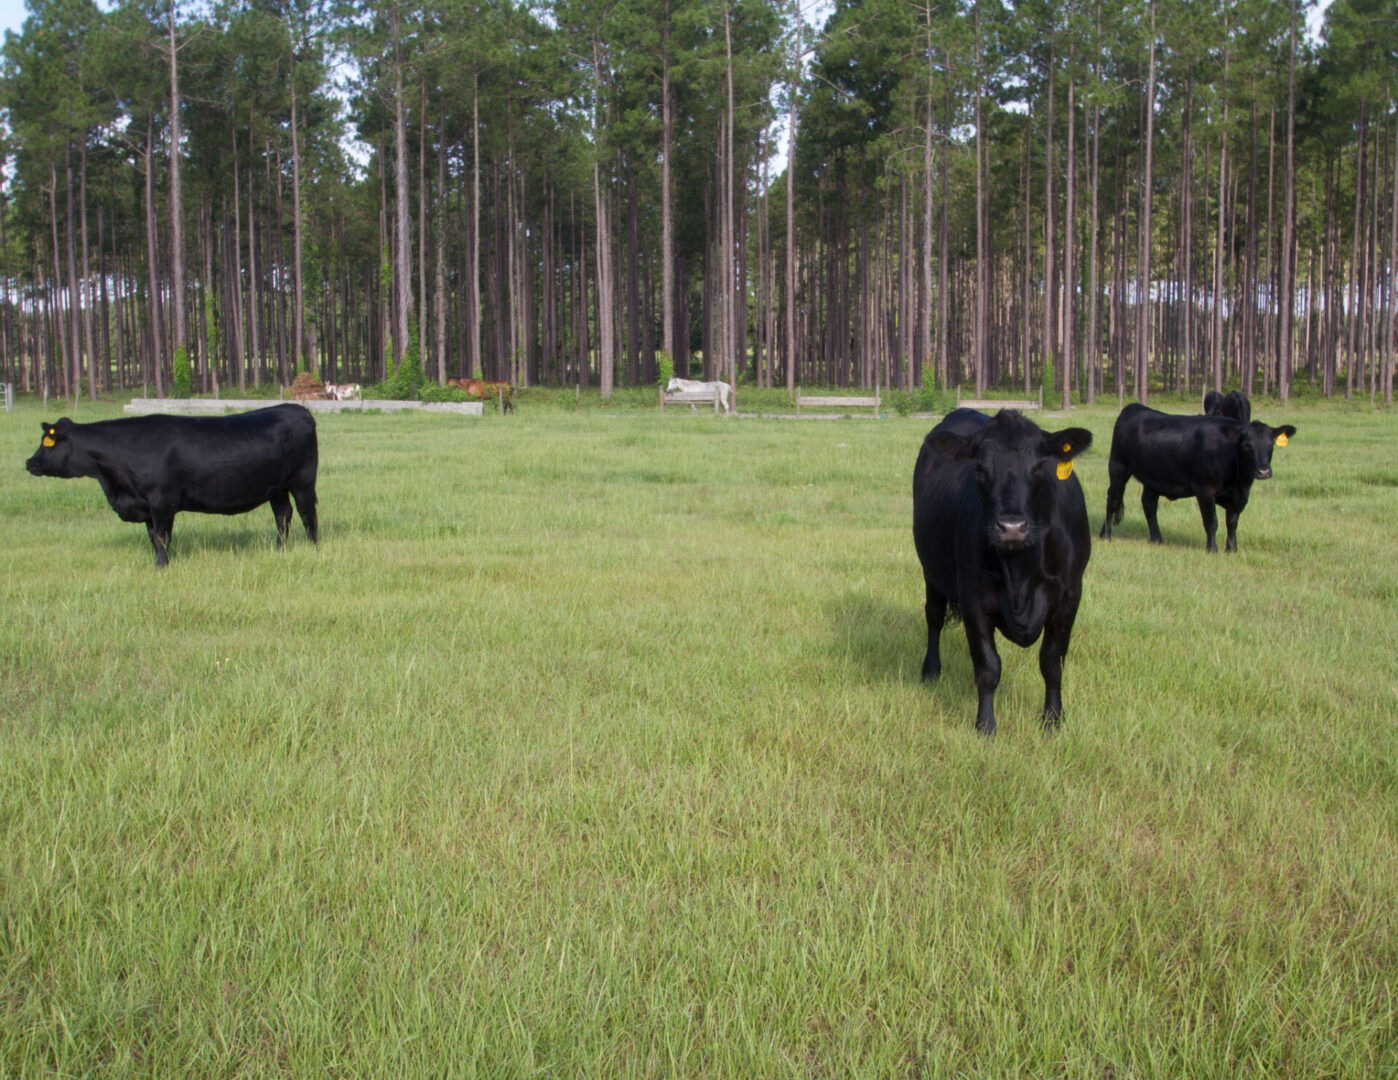 A group of black cows in the grass.